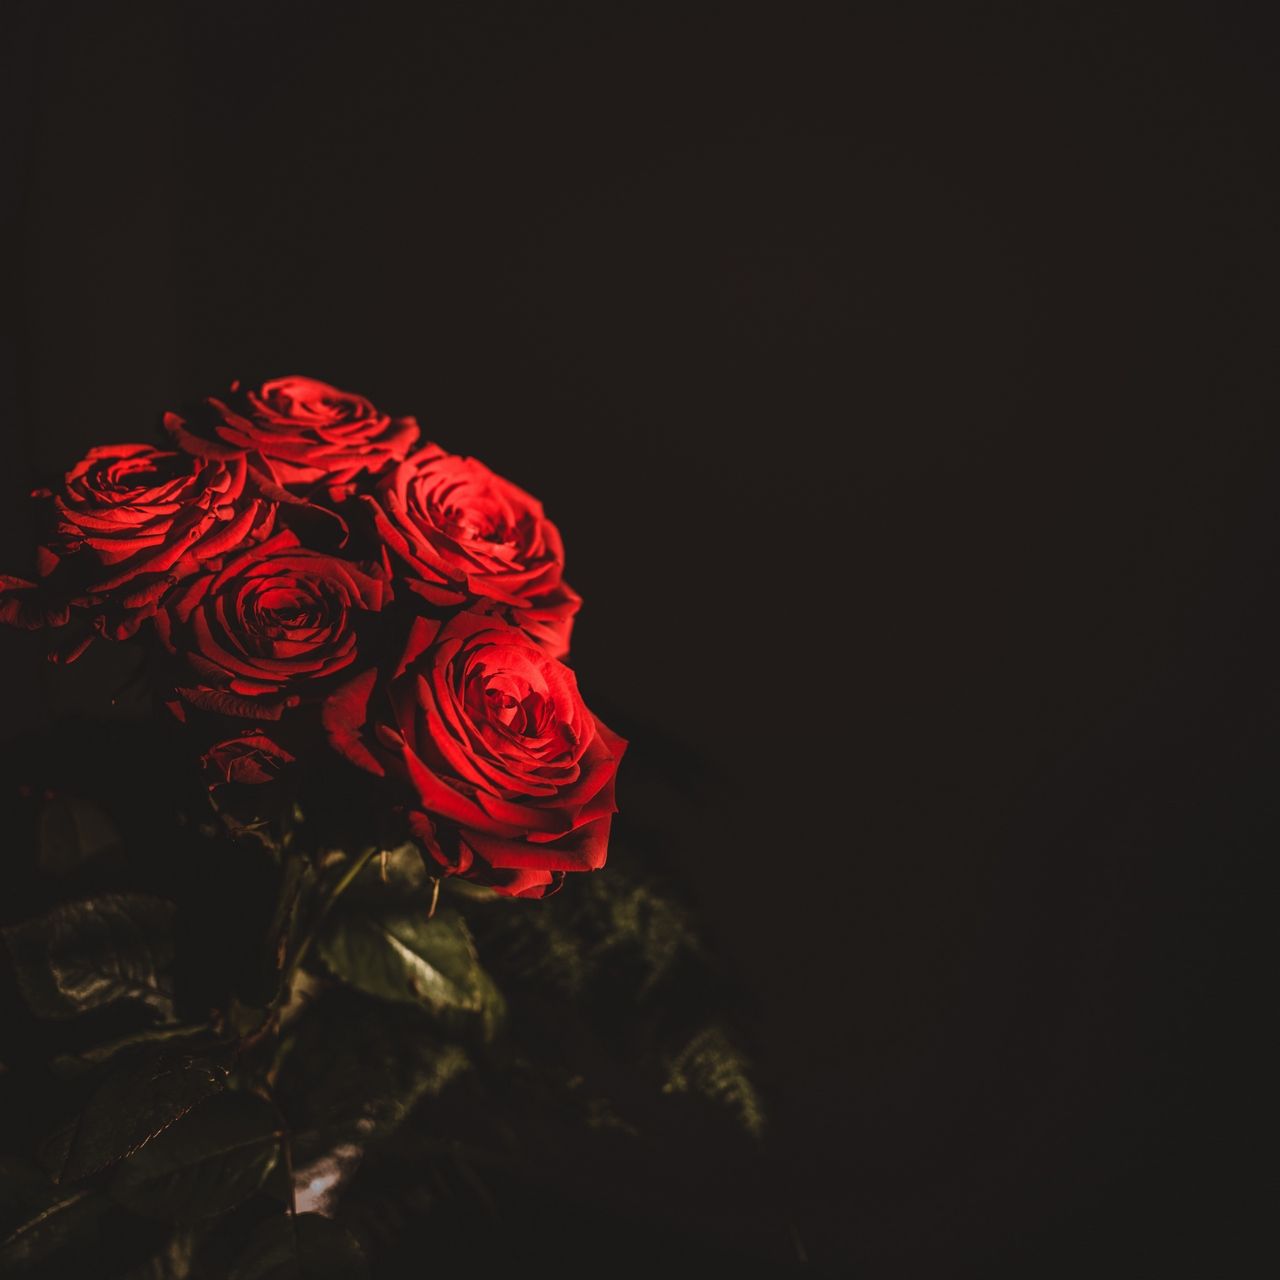 Black And Red Rose Wallpapers